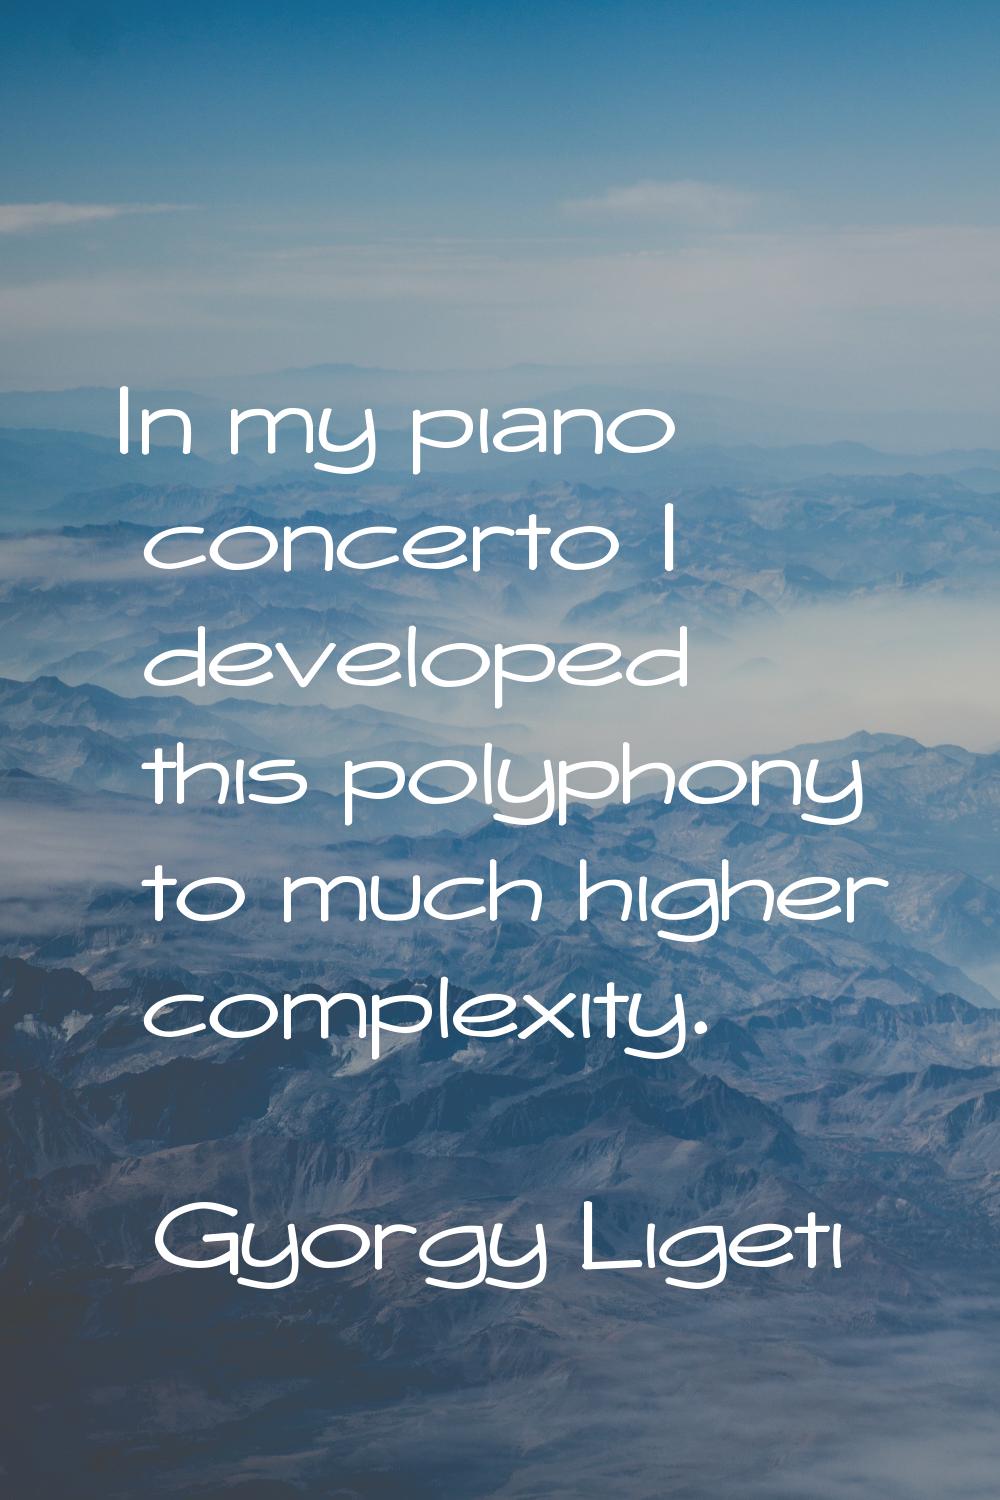 In my piano concerto I developed this polyphony to much higher complexity.